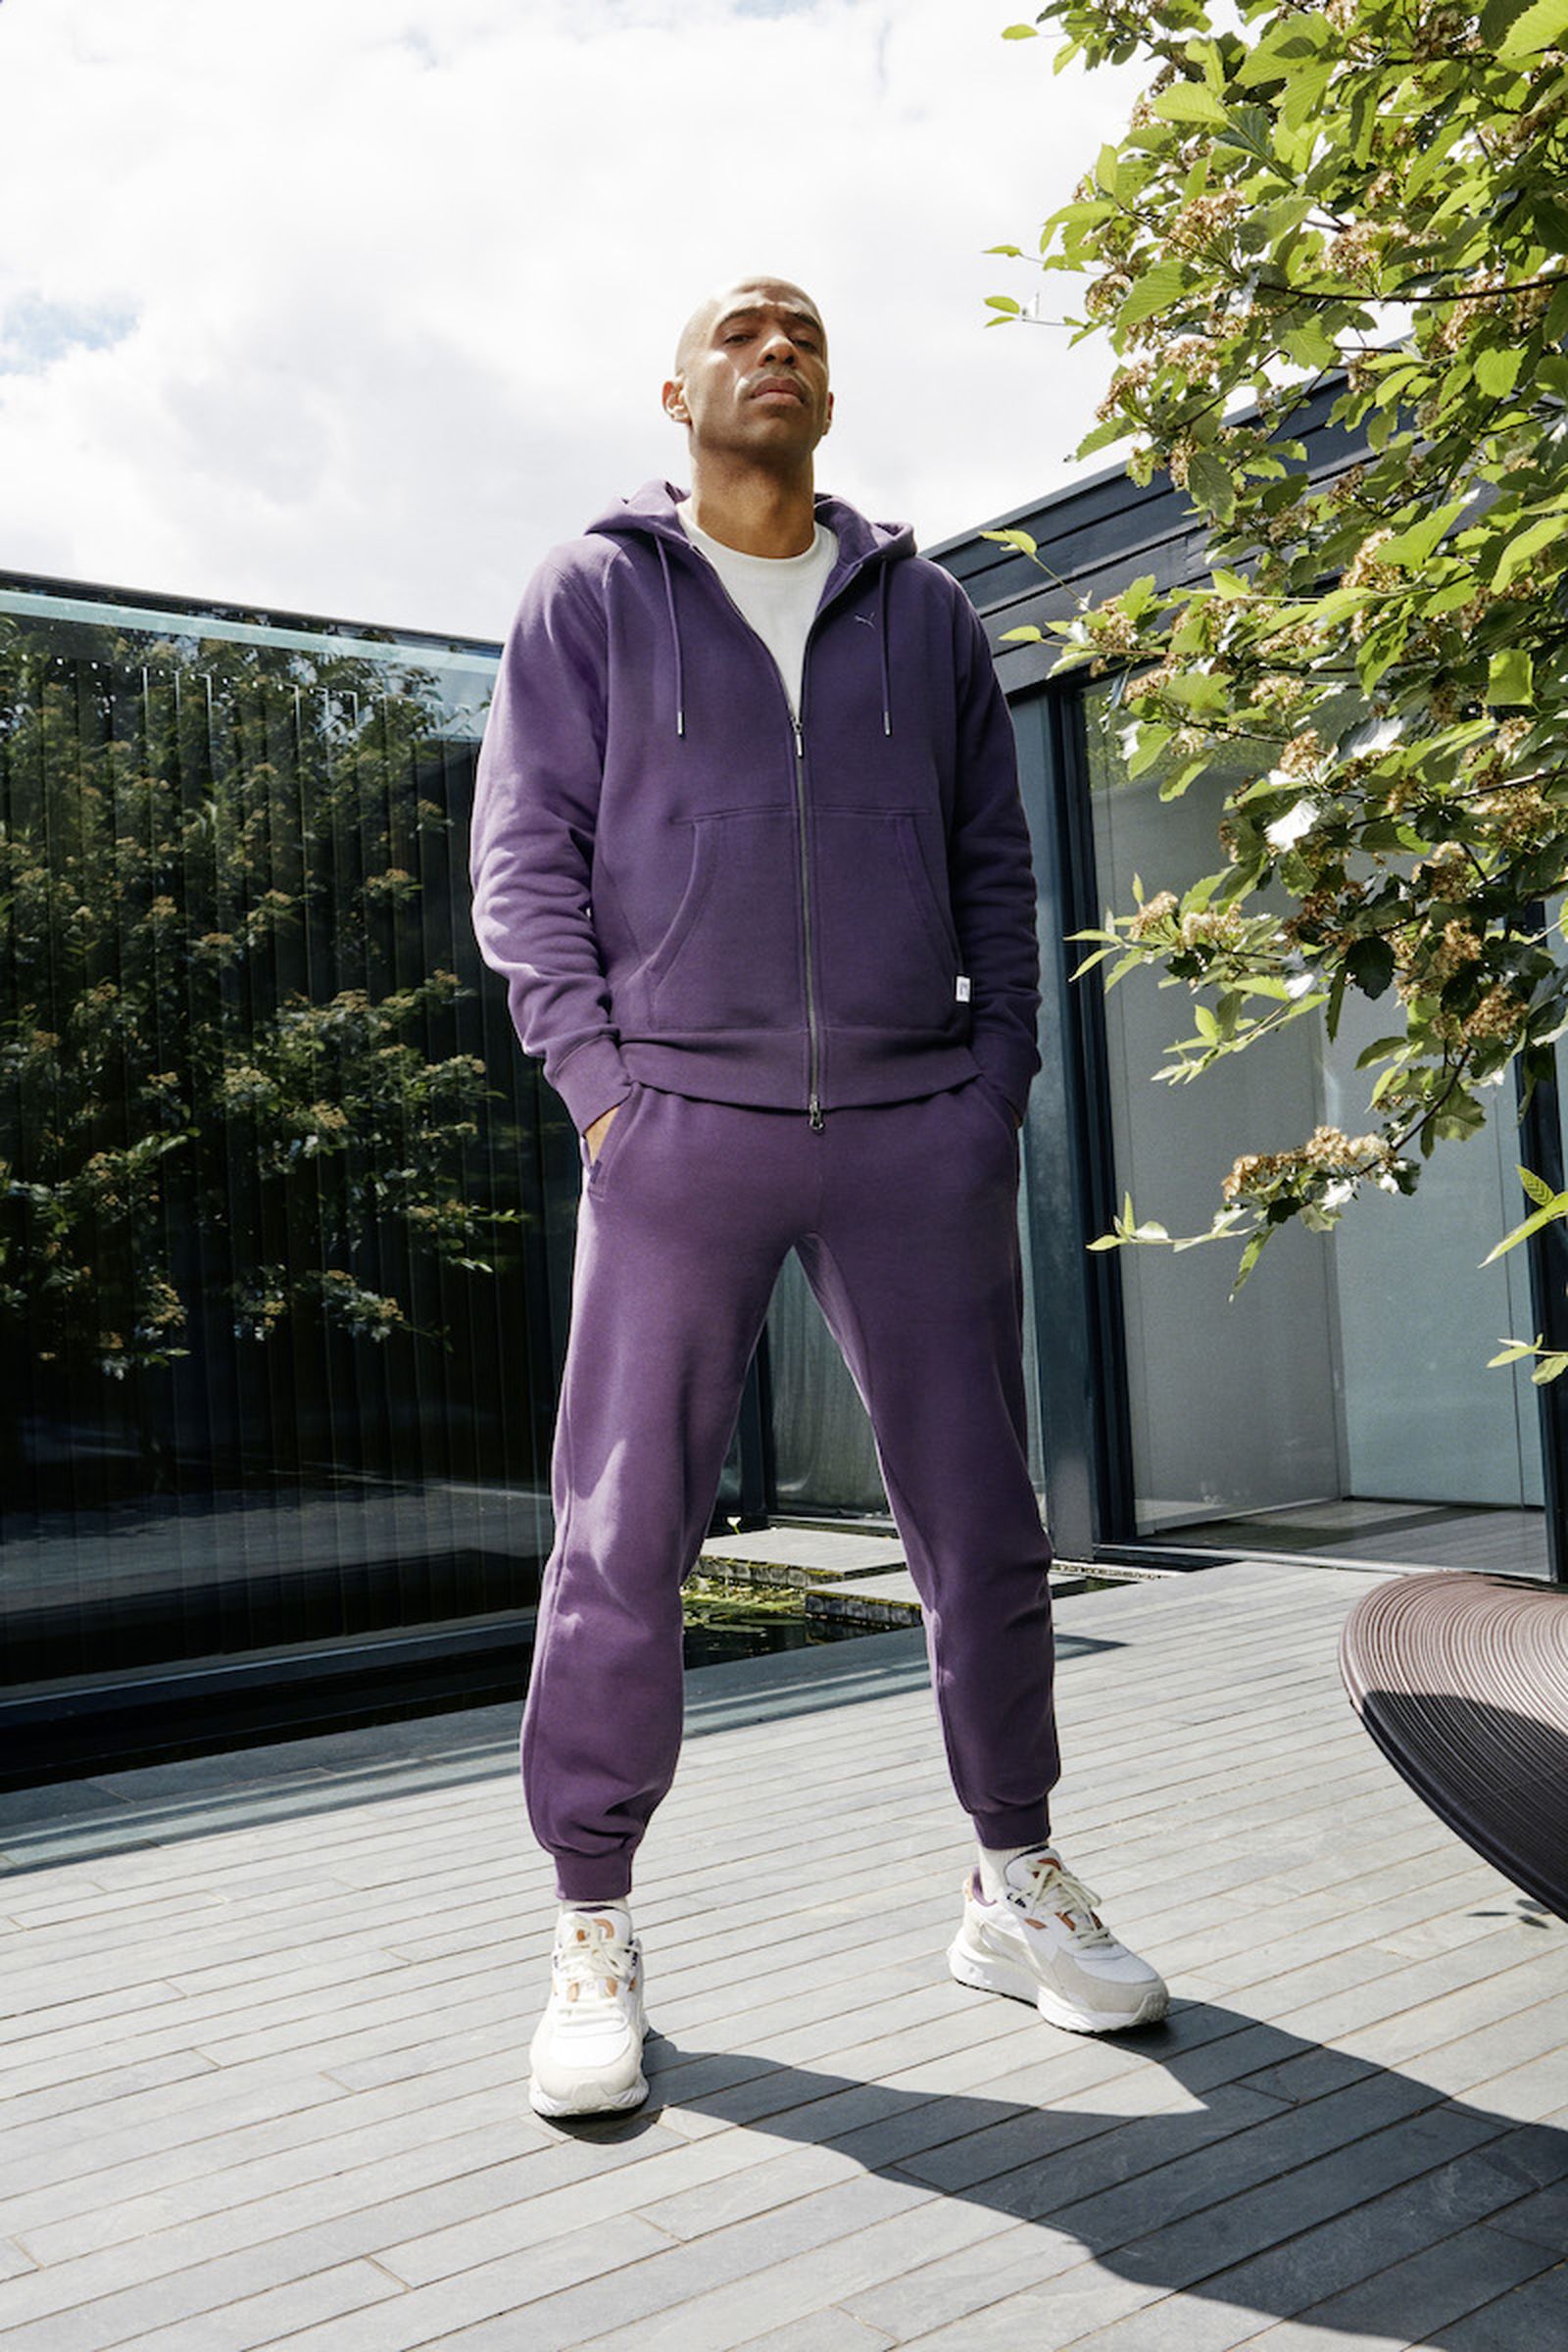 PUMA Made With Quality Collection Thierry Henry Campaign | vlr.eng.br